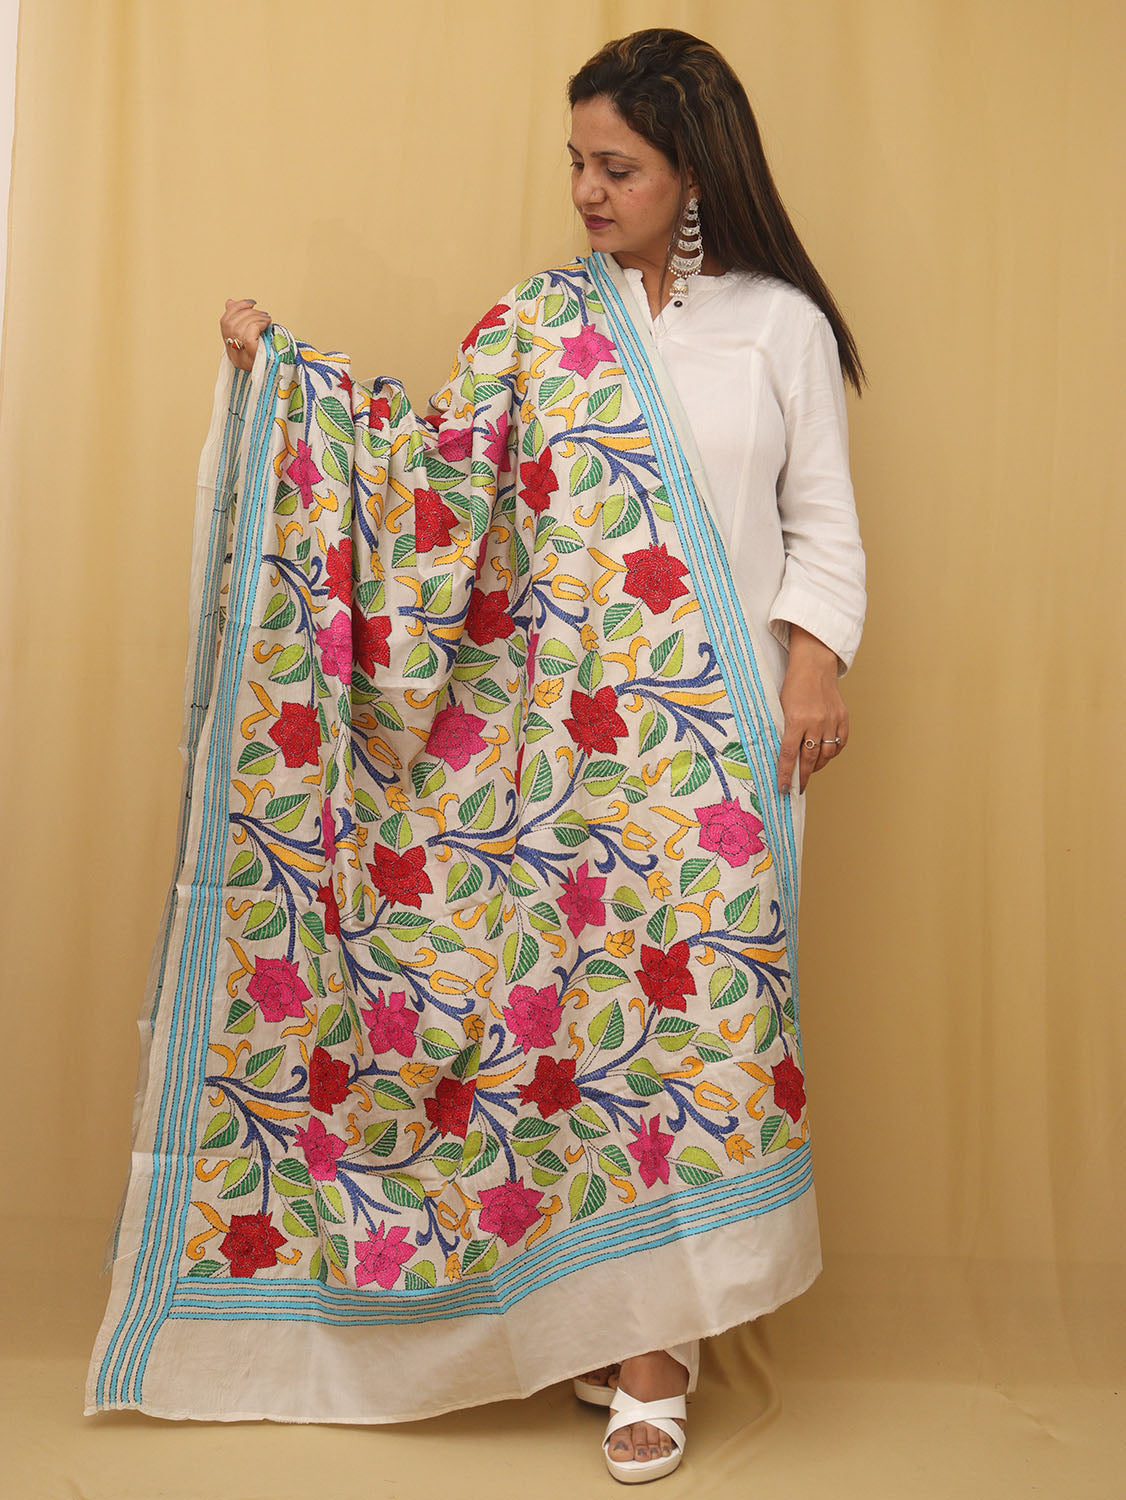 Exquisite Off White Kantha Silk Dupatta with Hand Embroidery